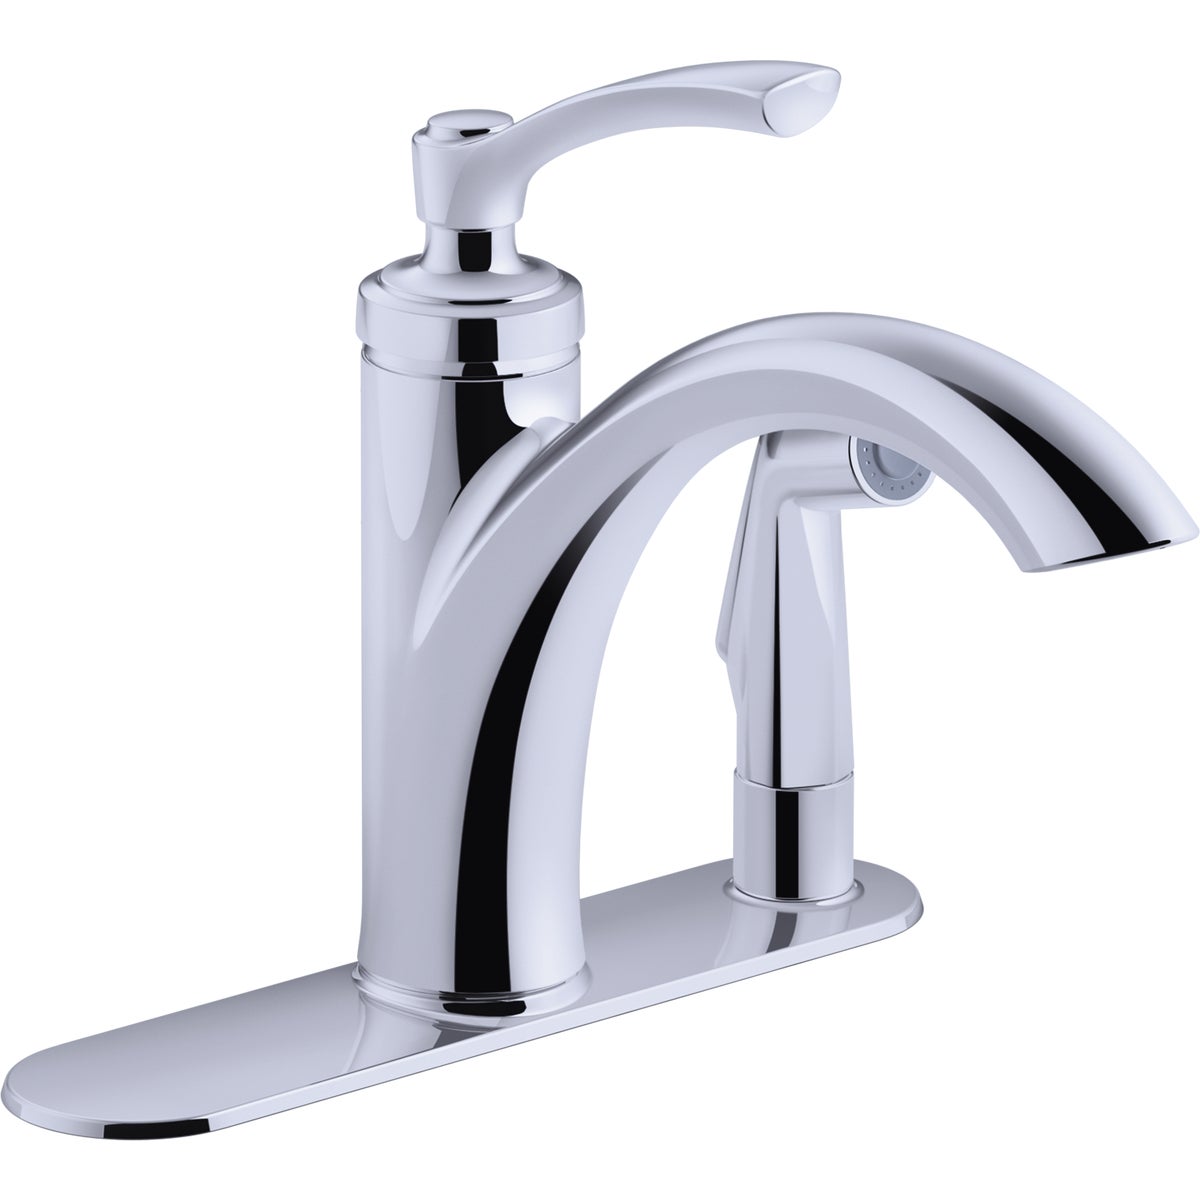 Item 404665, With a simple silhouette and a clean, flowing design, the Linwood faucet is